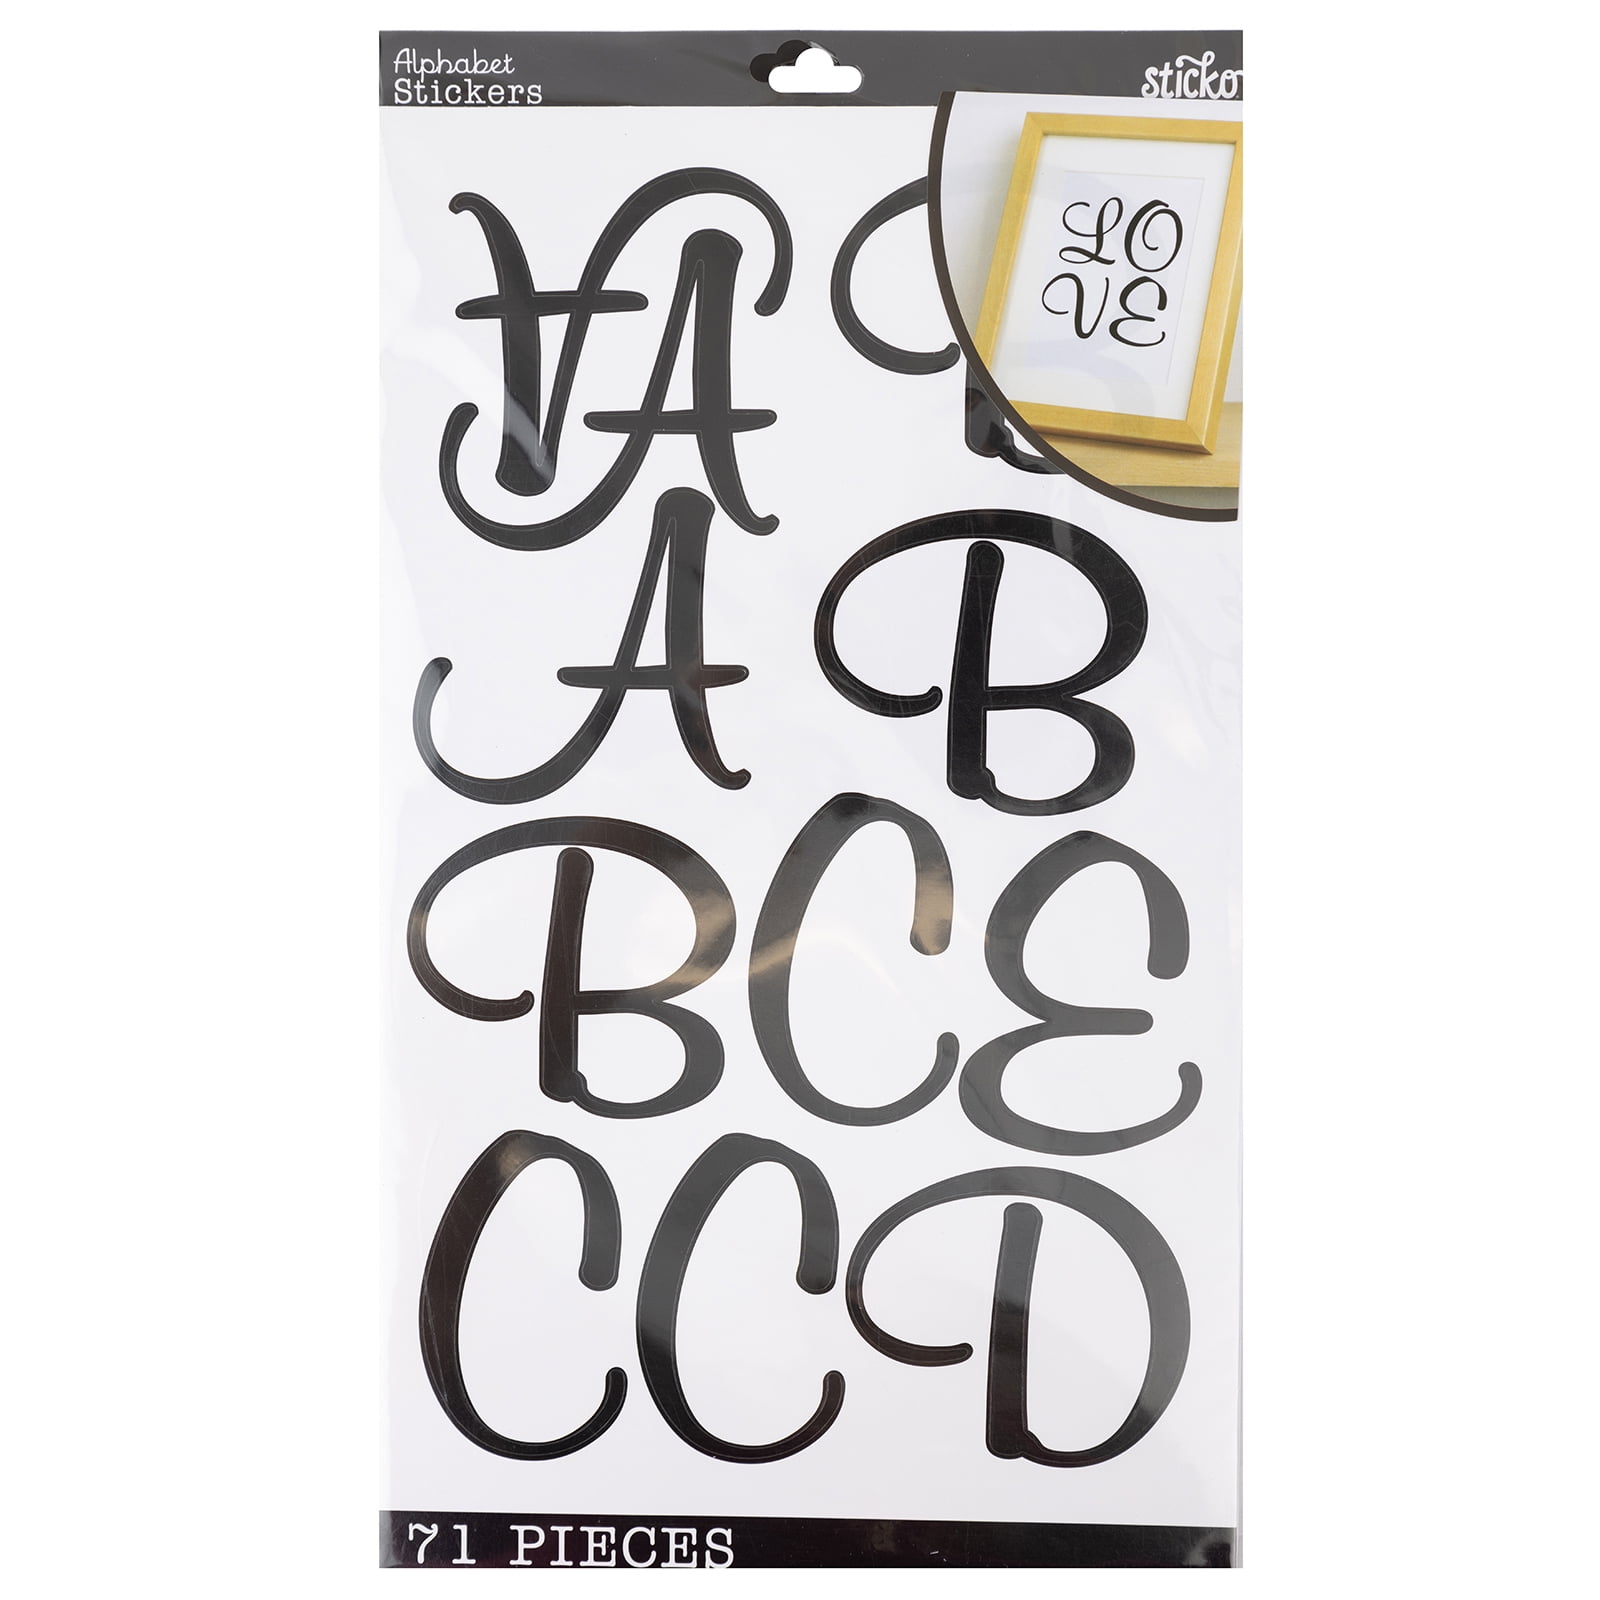  Black 24 Sheets Large Letter Stickers, 318 Pcs 2 Inch